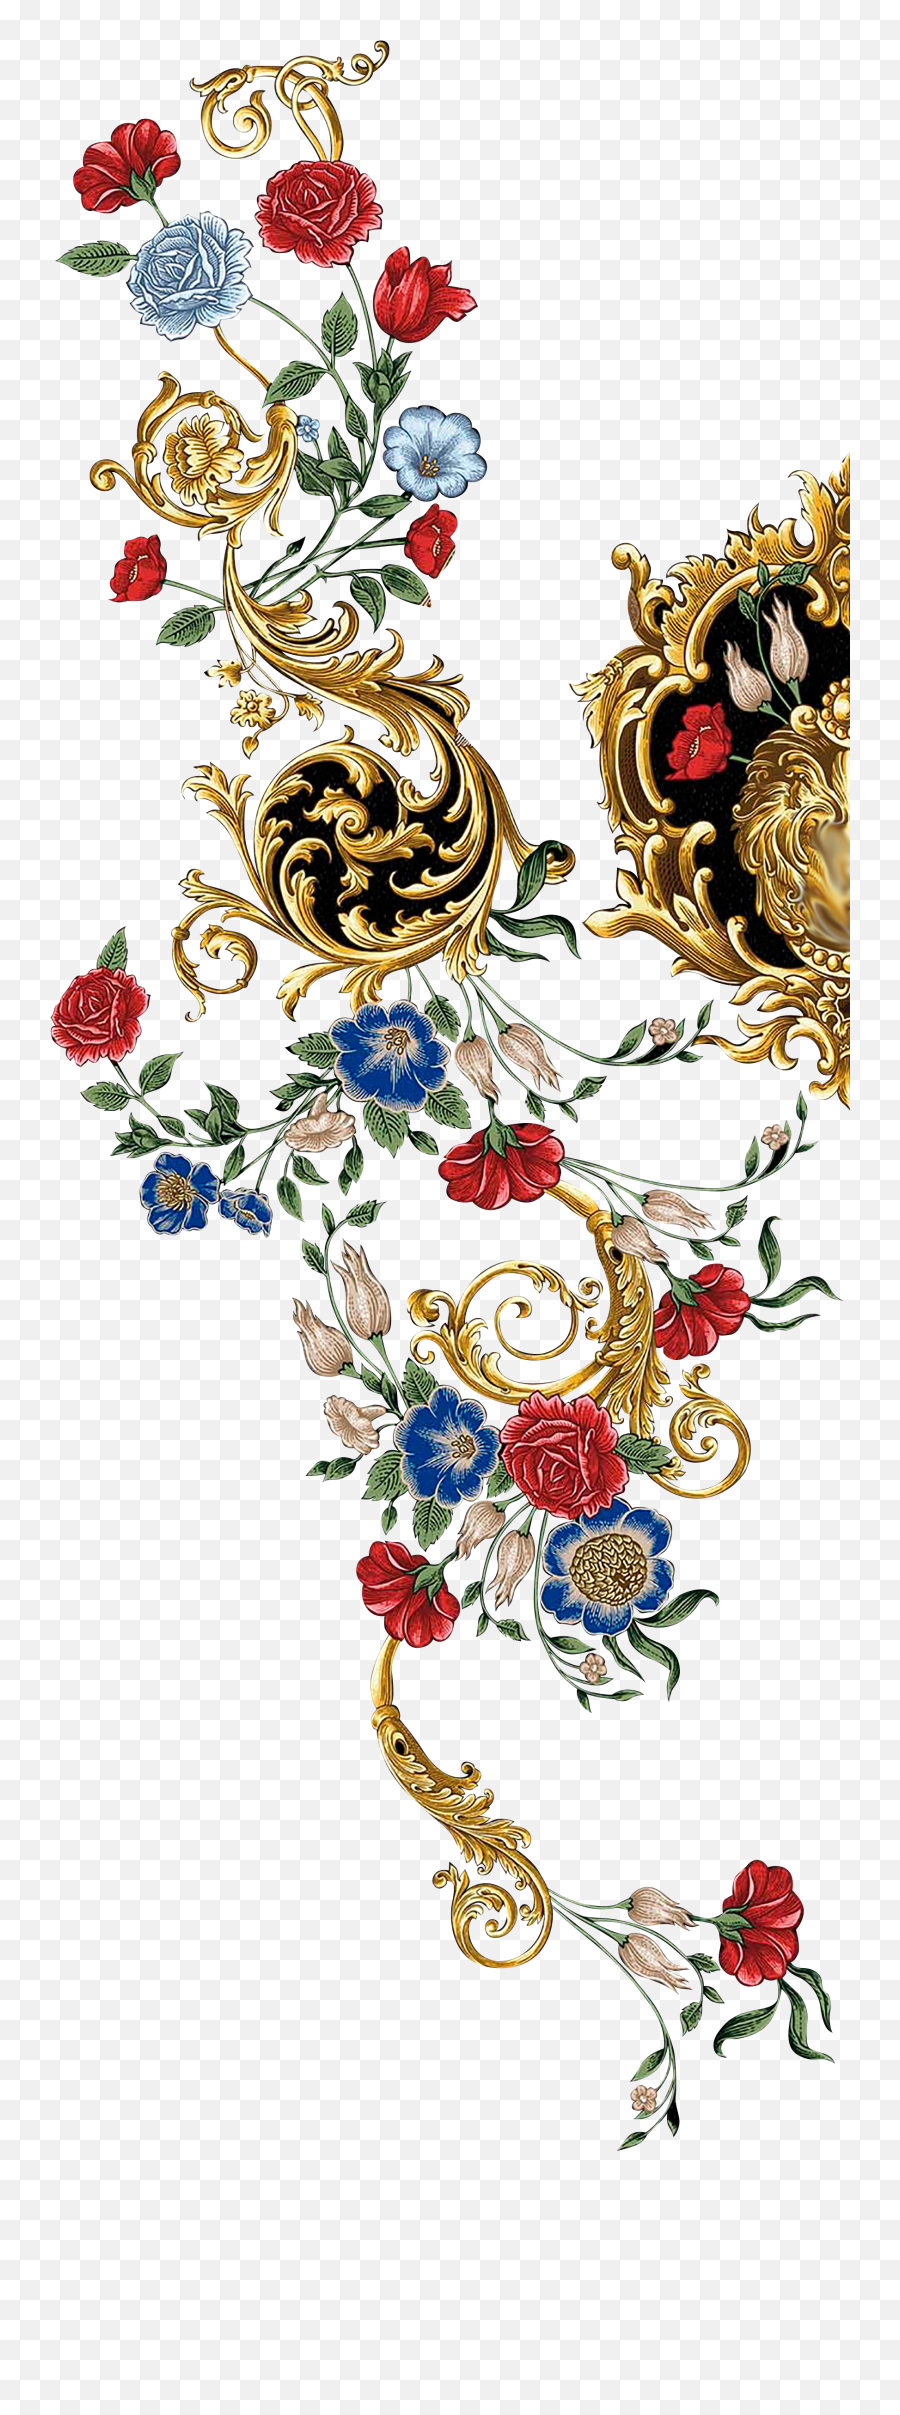 Pin By Romeo Rehmani On Versache Flower Art Images - Baroque Floral Architecture Emoji,Emoji Embroidery Designs